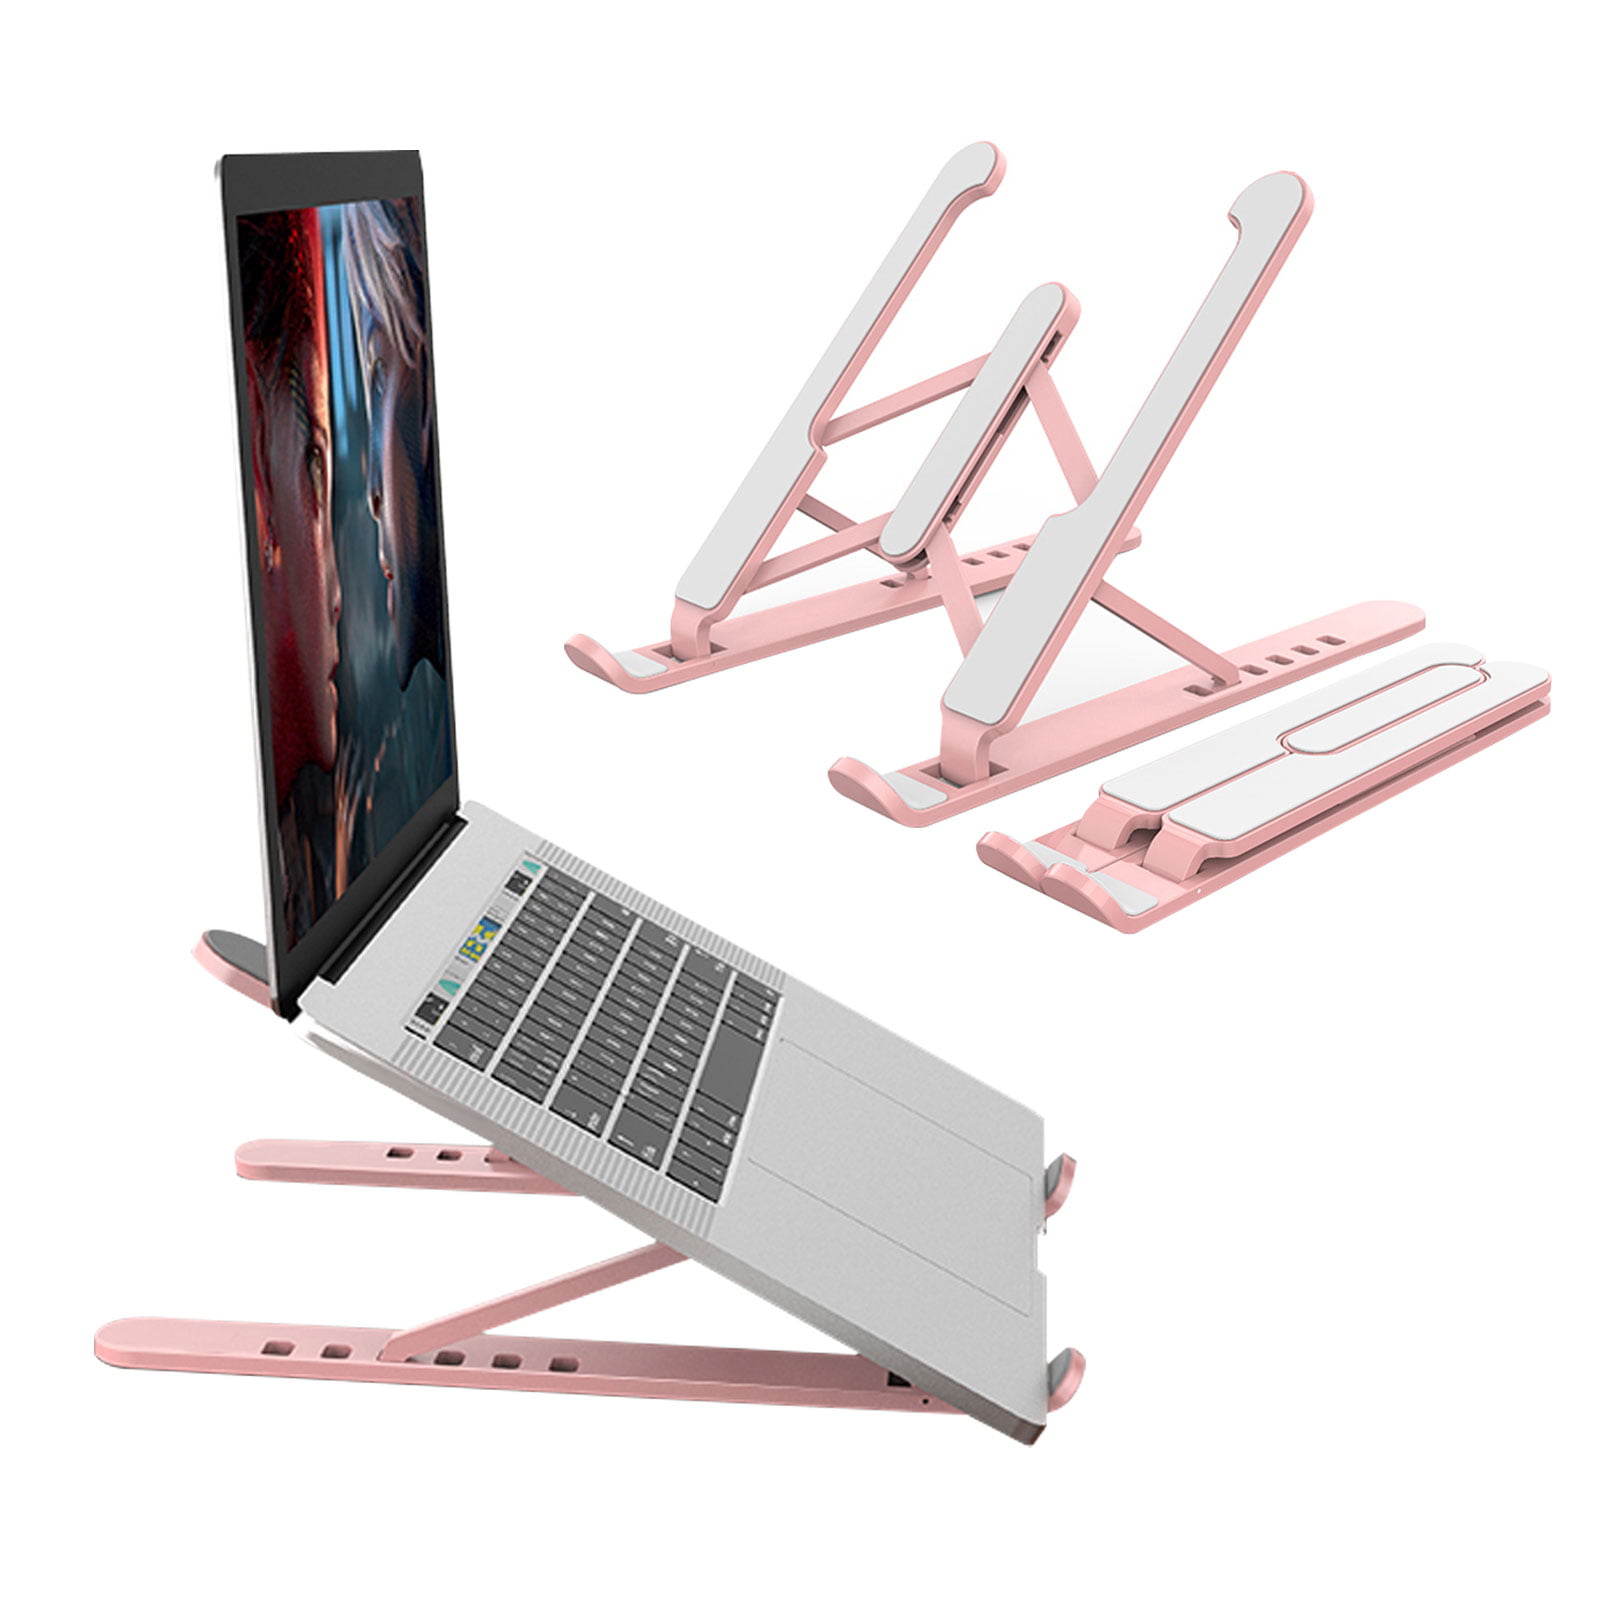 Aluminium Alloy Foldable Notebook Stand for 11-15.6 Inch Laptops and Tablets Ergonomic & Light Protable Laptop Stand Adjustable